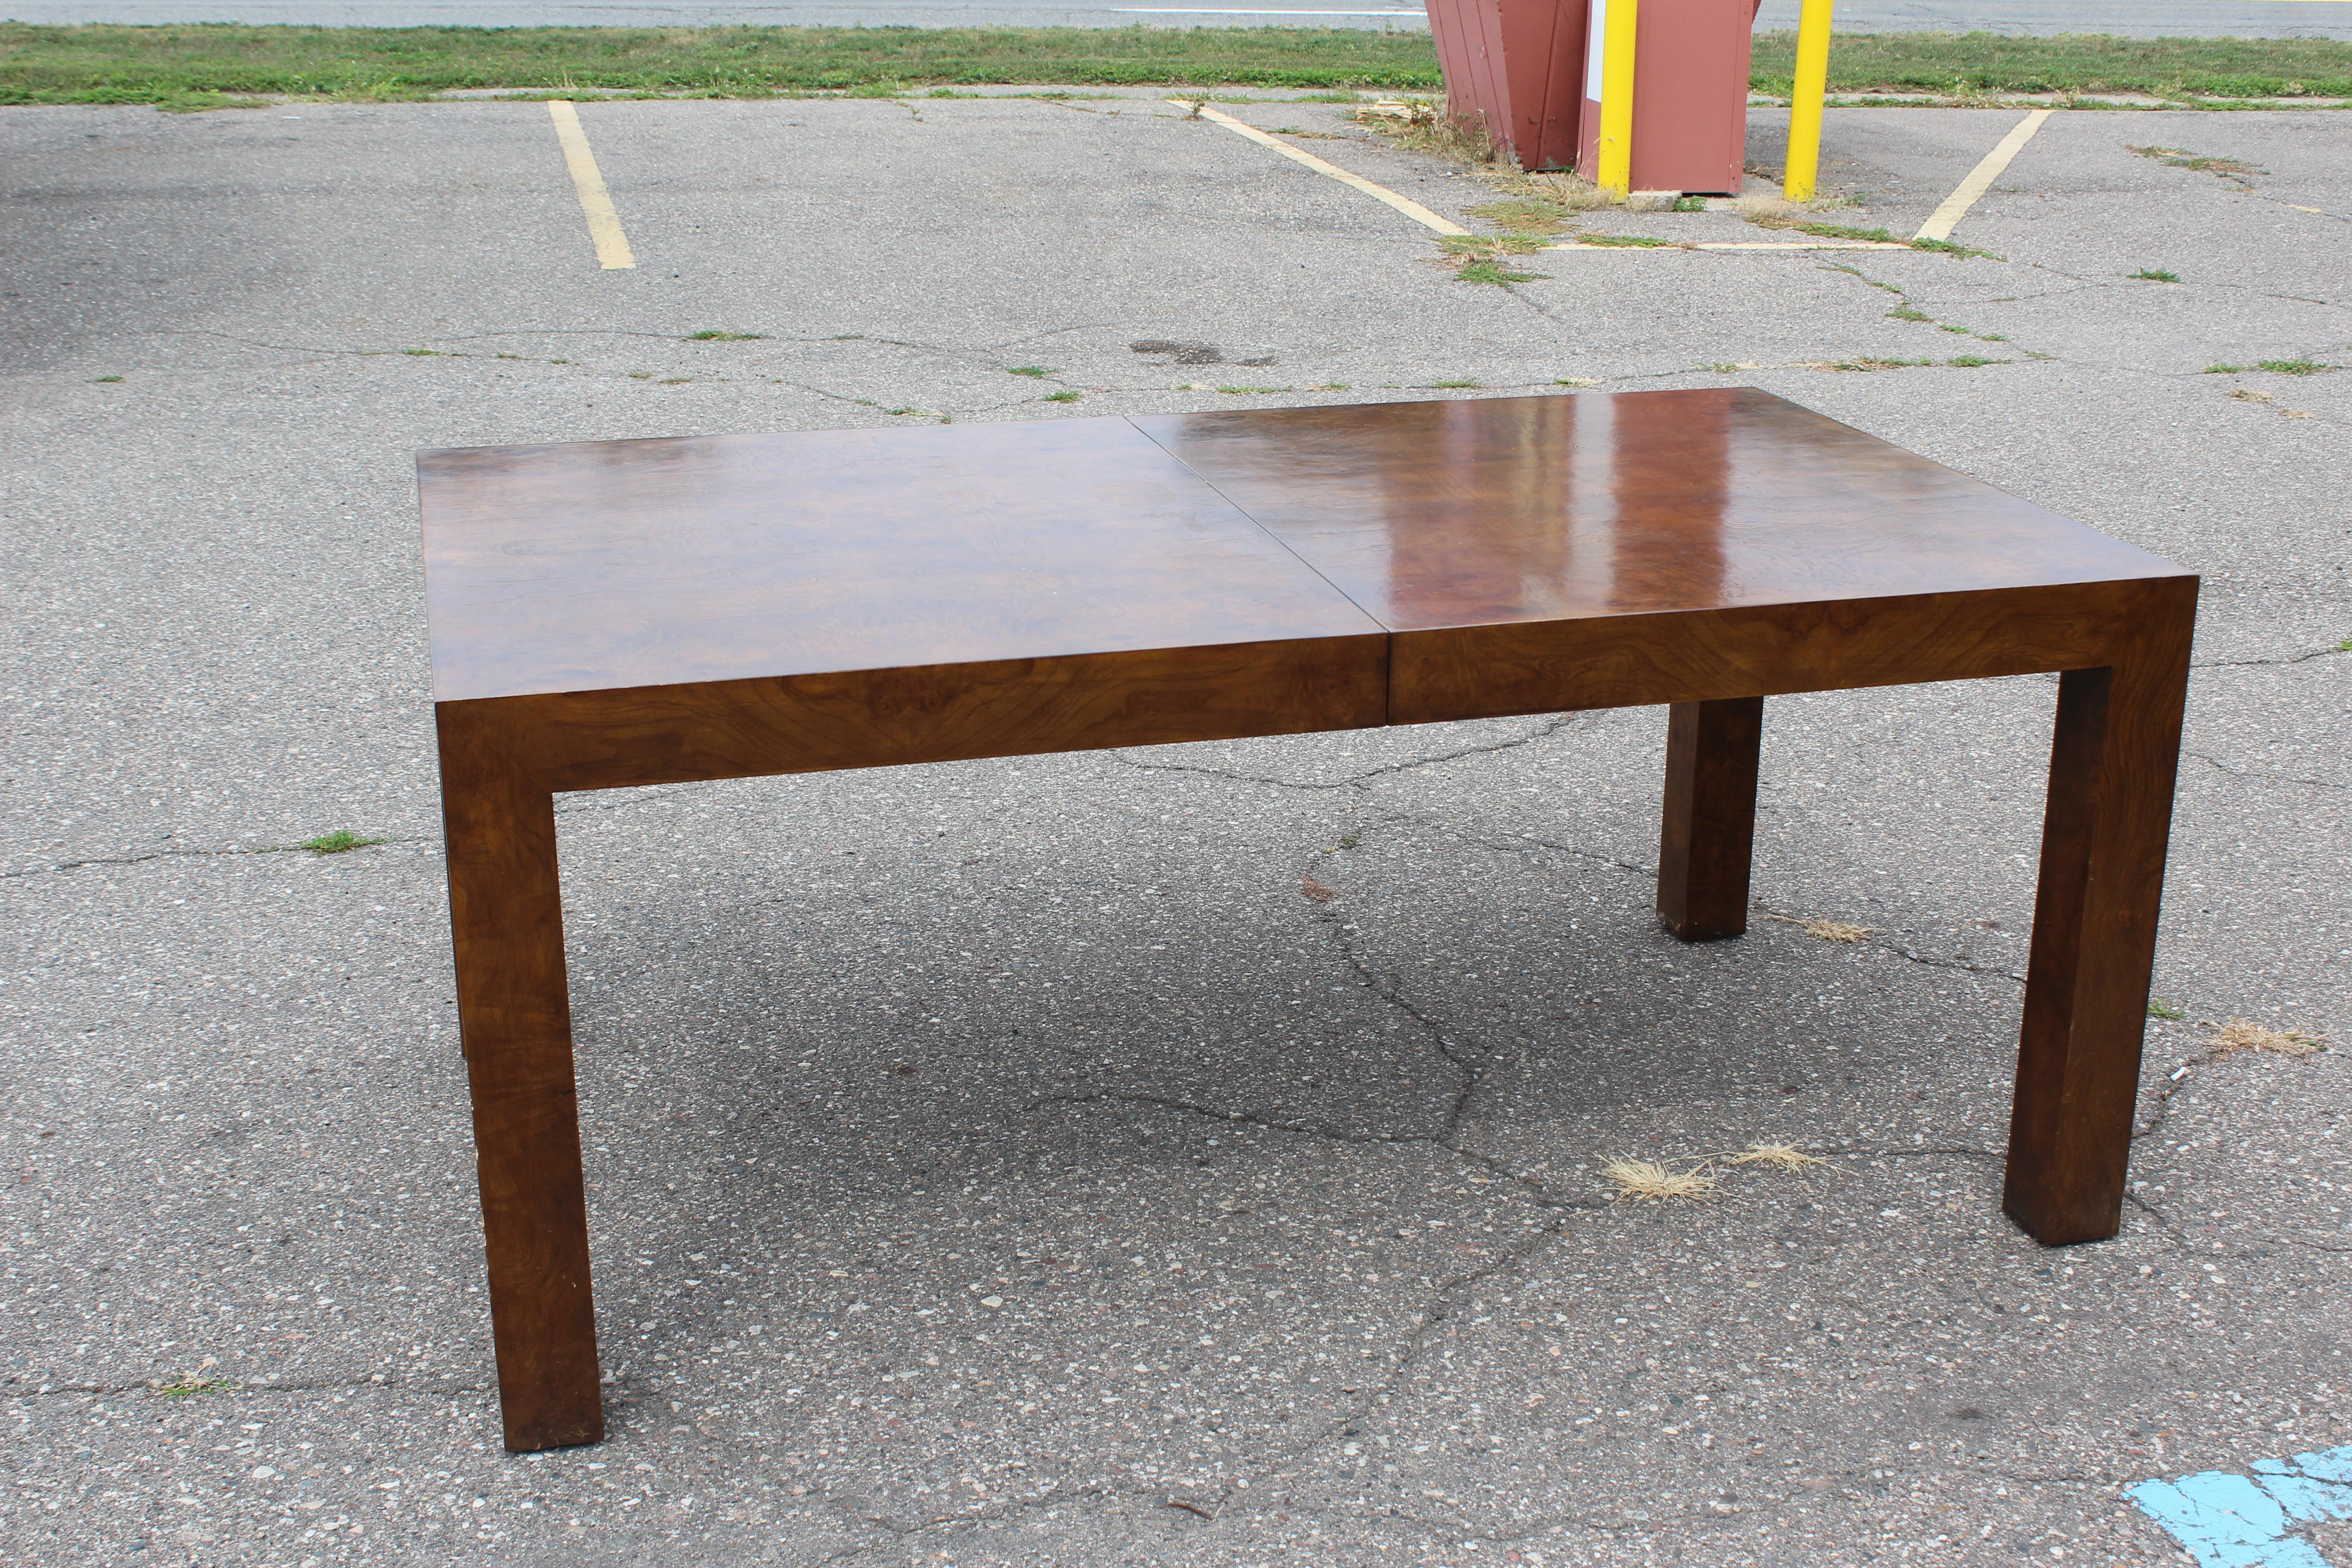 For your consideration is a Milo Baughman for Parsons dining table with two leaves, circa 1970s. In very good condition. Dimensions are H-28.75